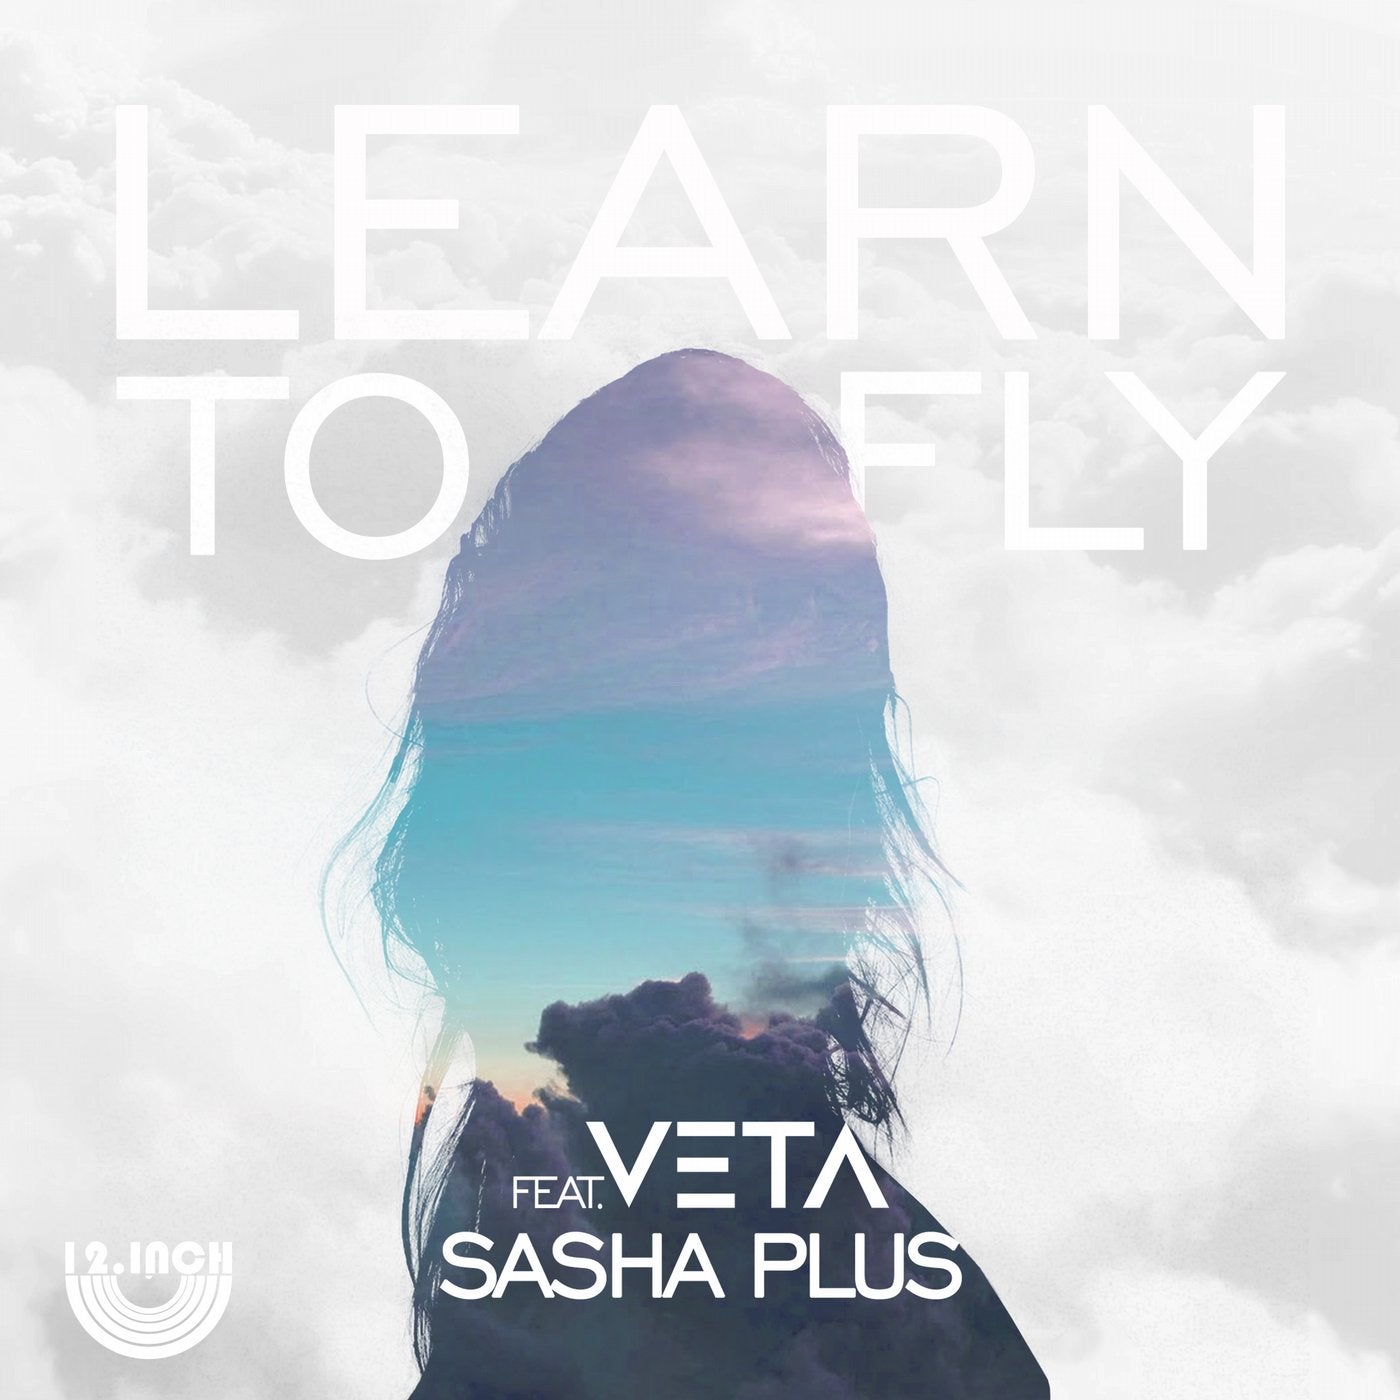 Learn To Fly feat. Veta